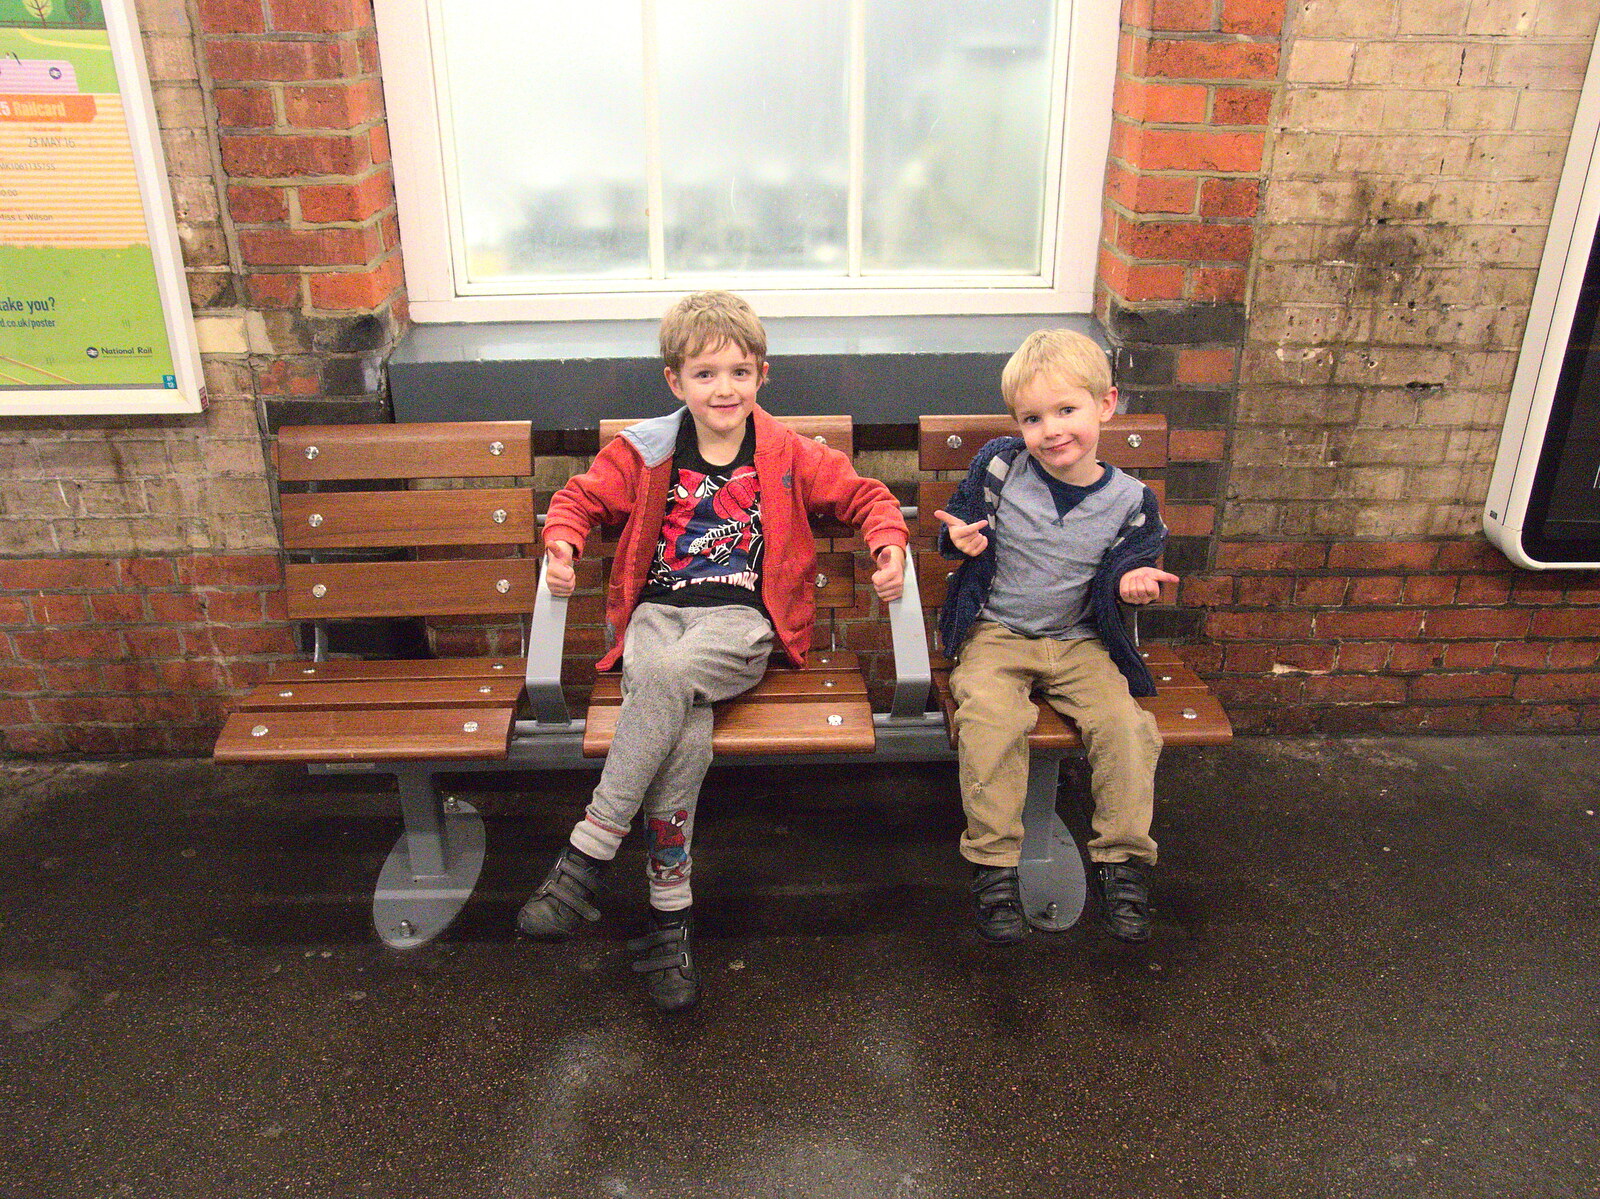 Fred and Harry sit down and pose from Isobel Goes to Lyon, Ipswich Station, Burrell Road - 24th January 2016